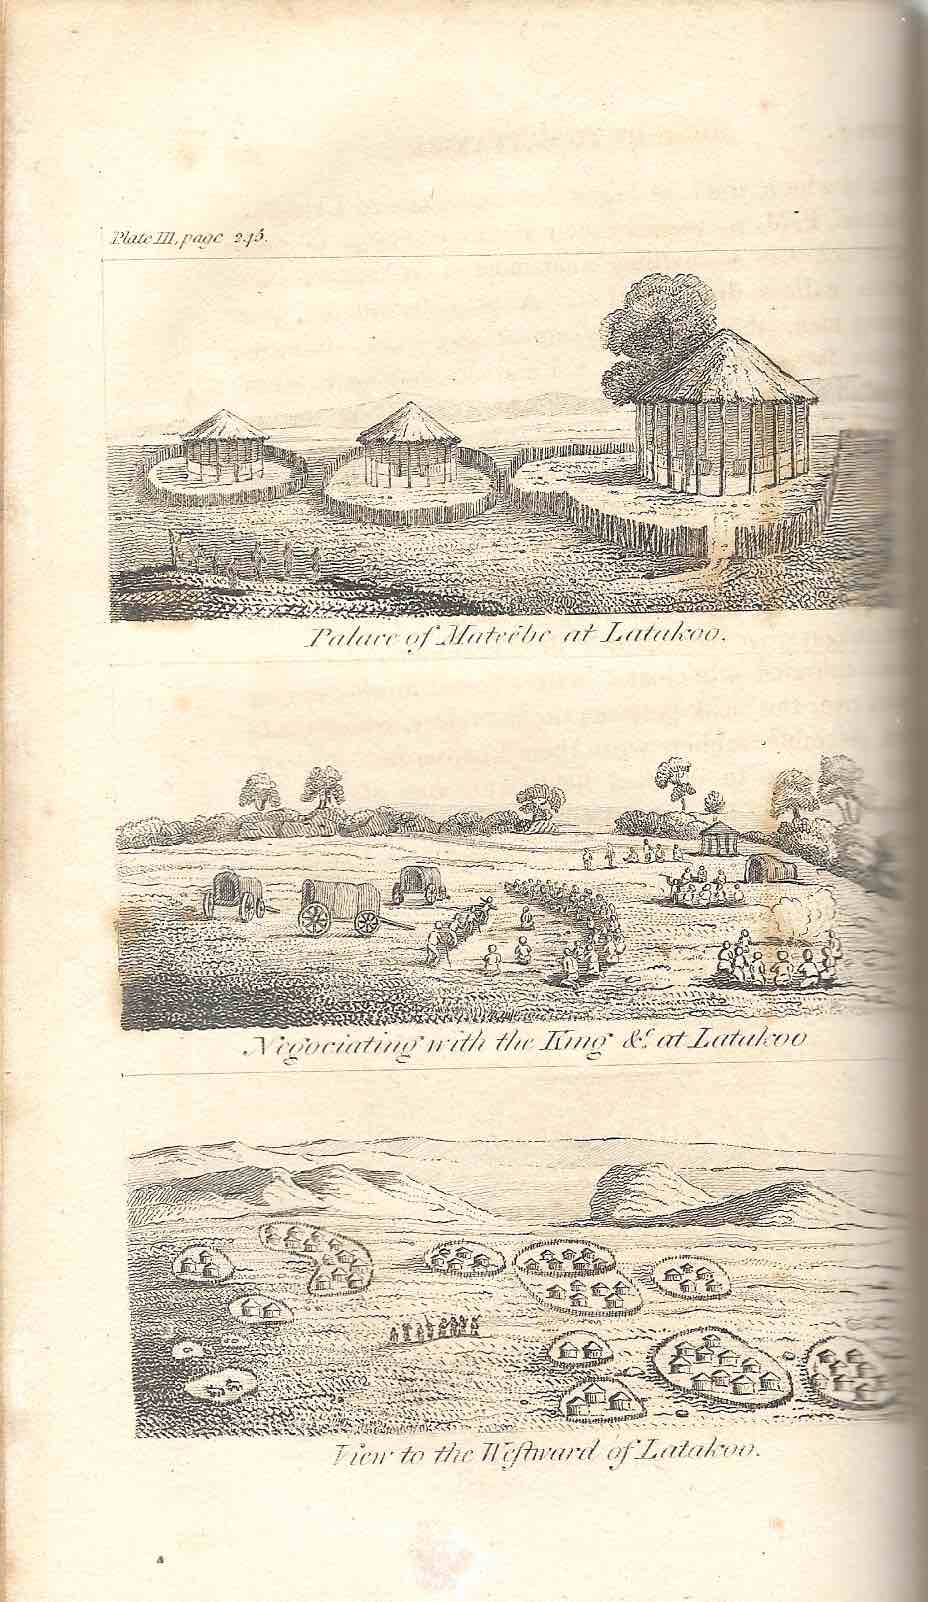 CAMPBELL, JOHN: - Travels in South Africa. Undertaken at the Request of the Missionary Society. London, Printed for the Black, Parry & Co., 1815.